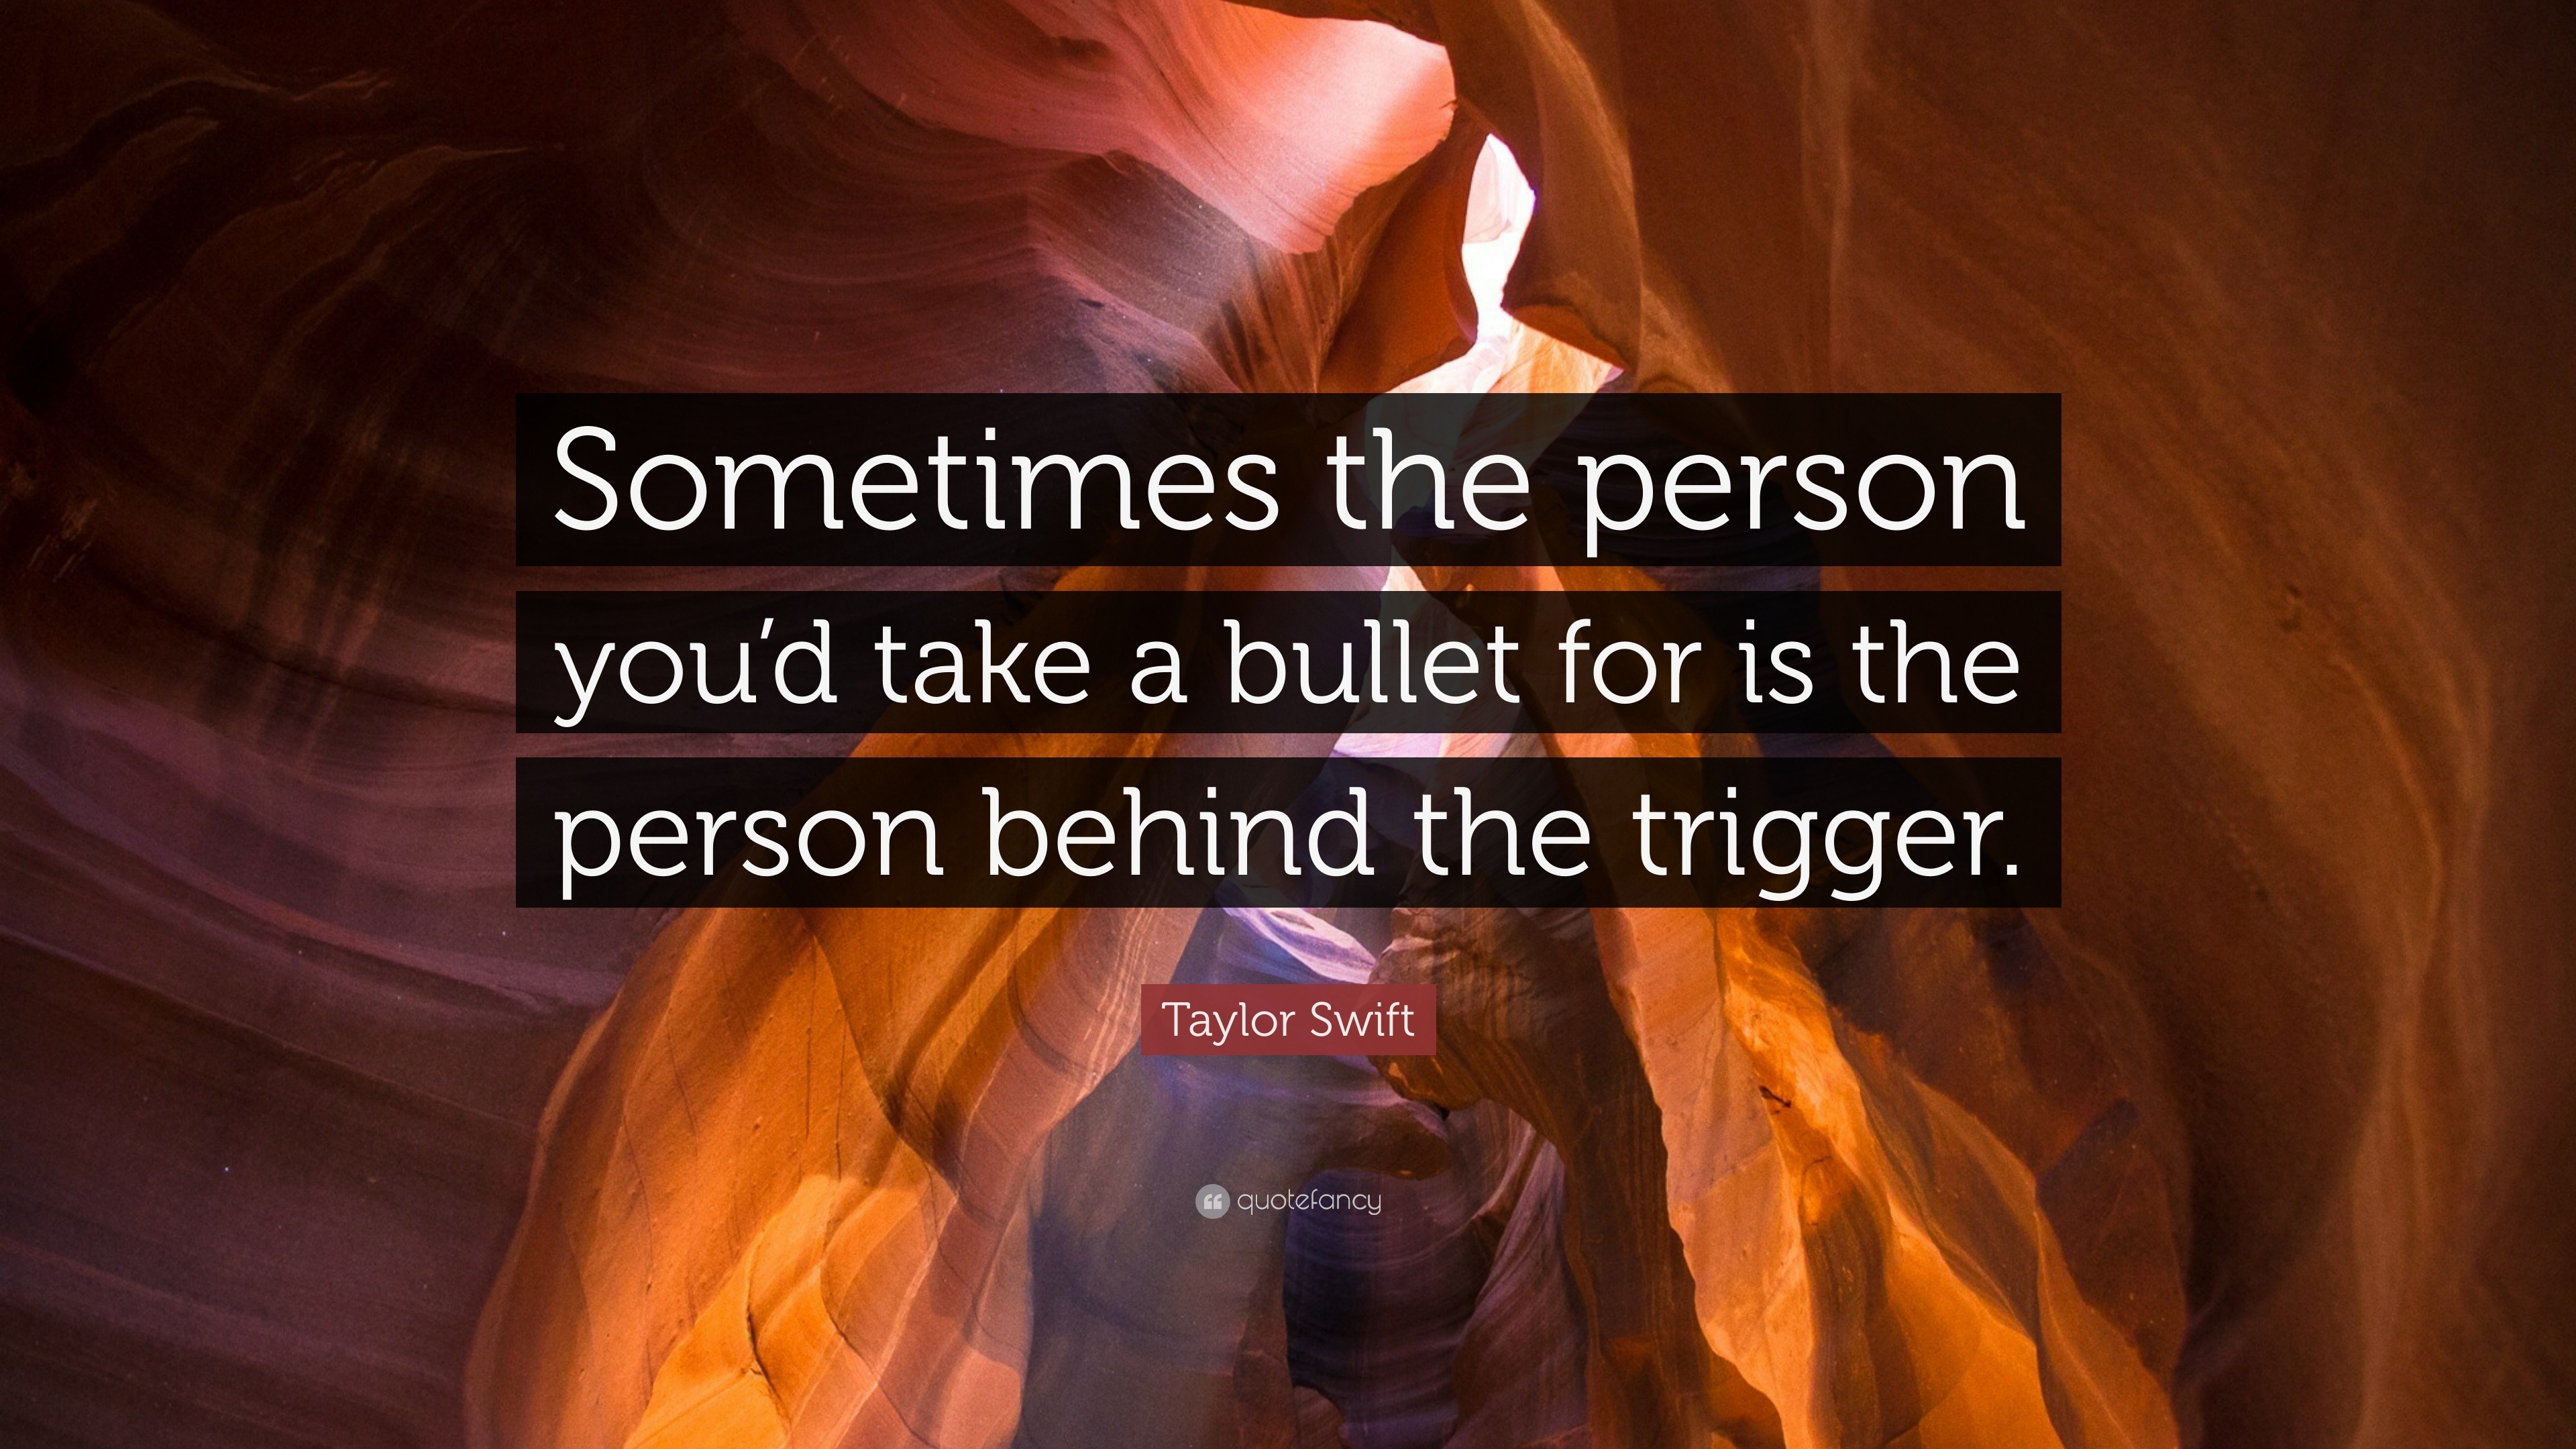 Taylor Swift Quote: “Sometimes the person you’d take a bullet for is